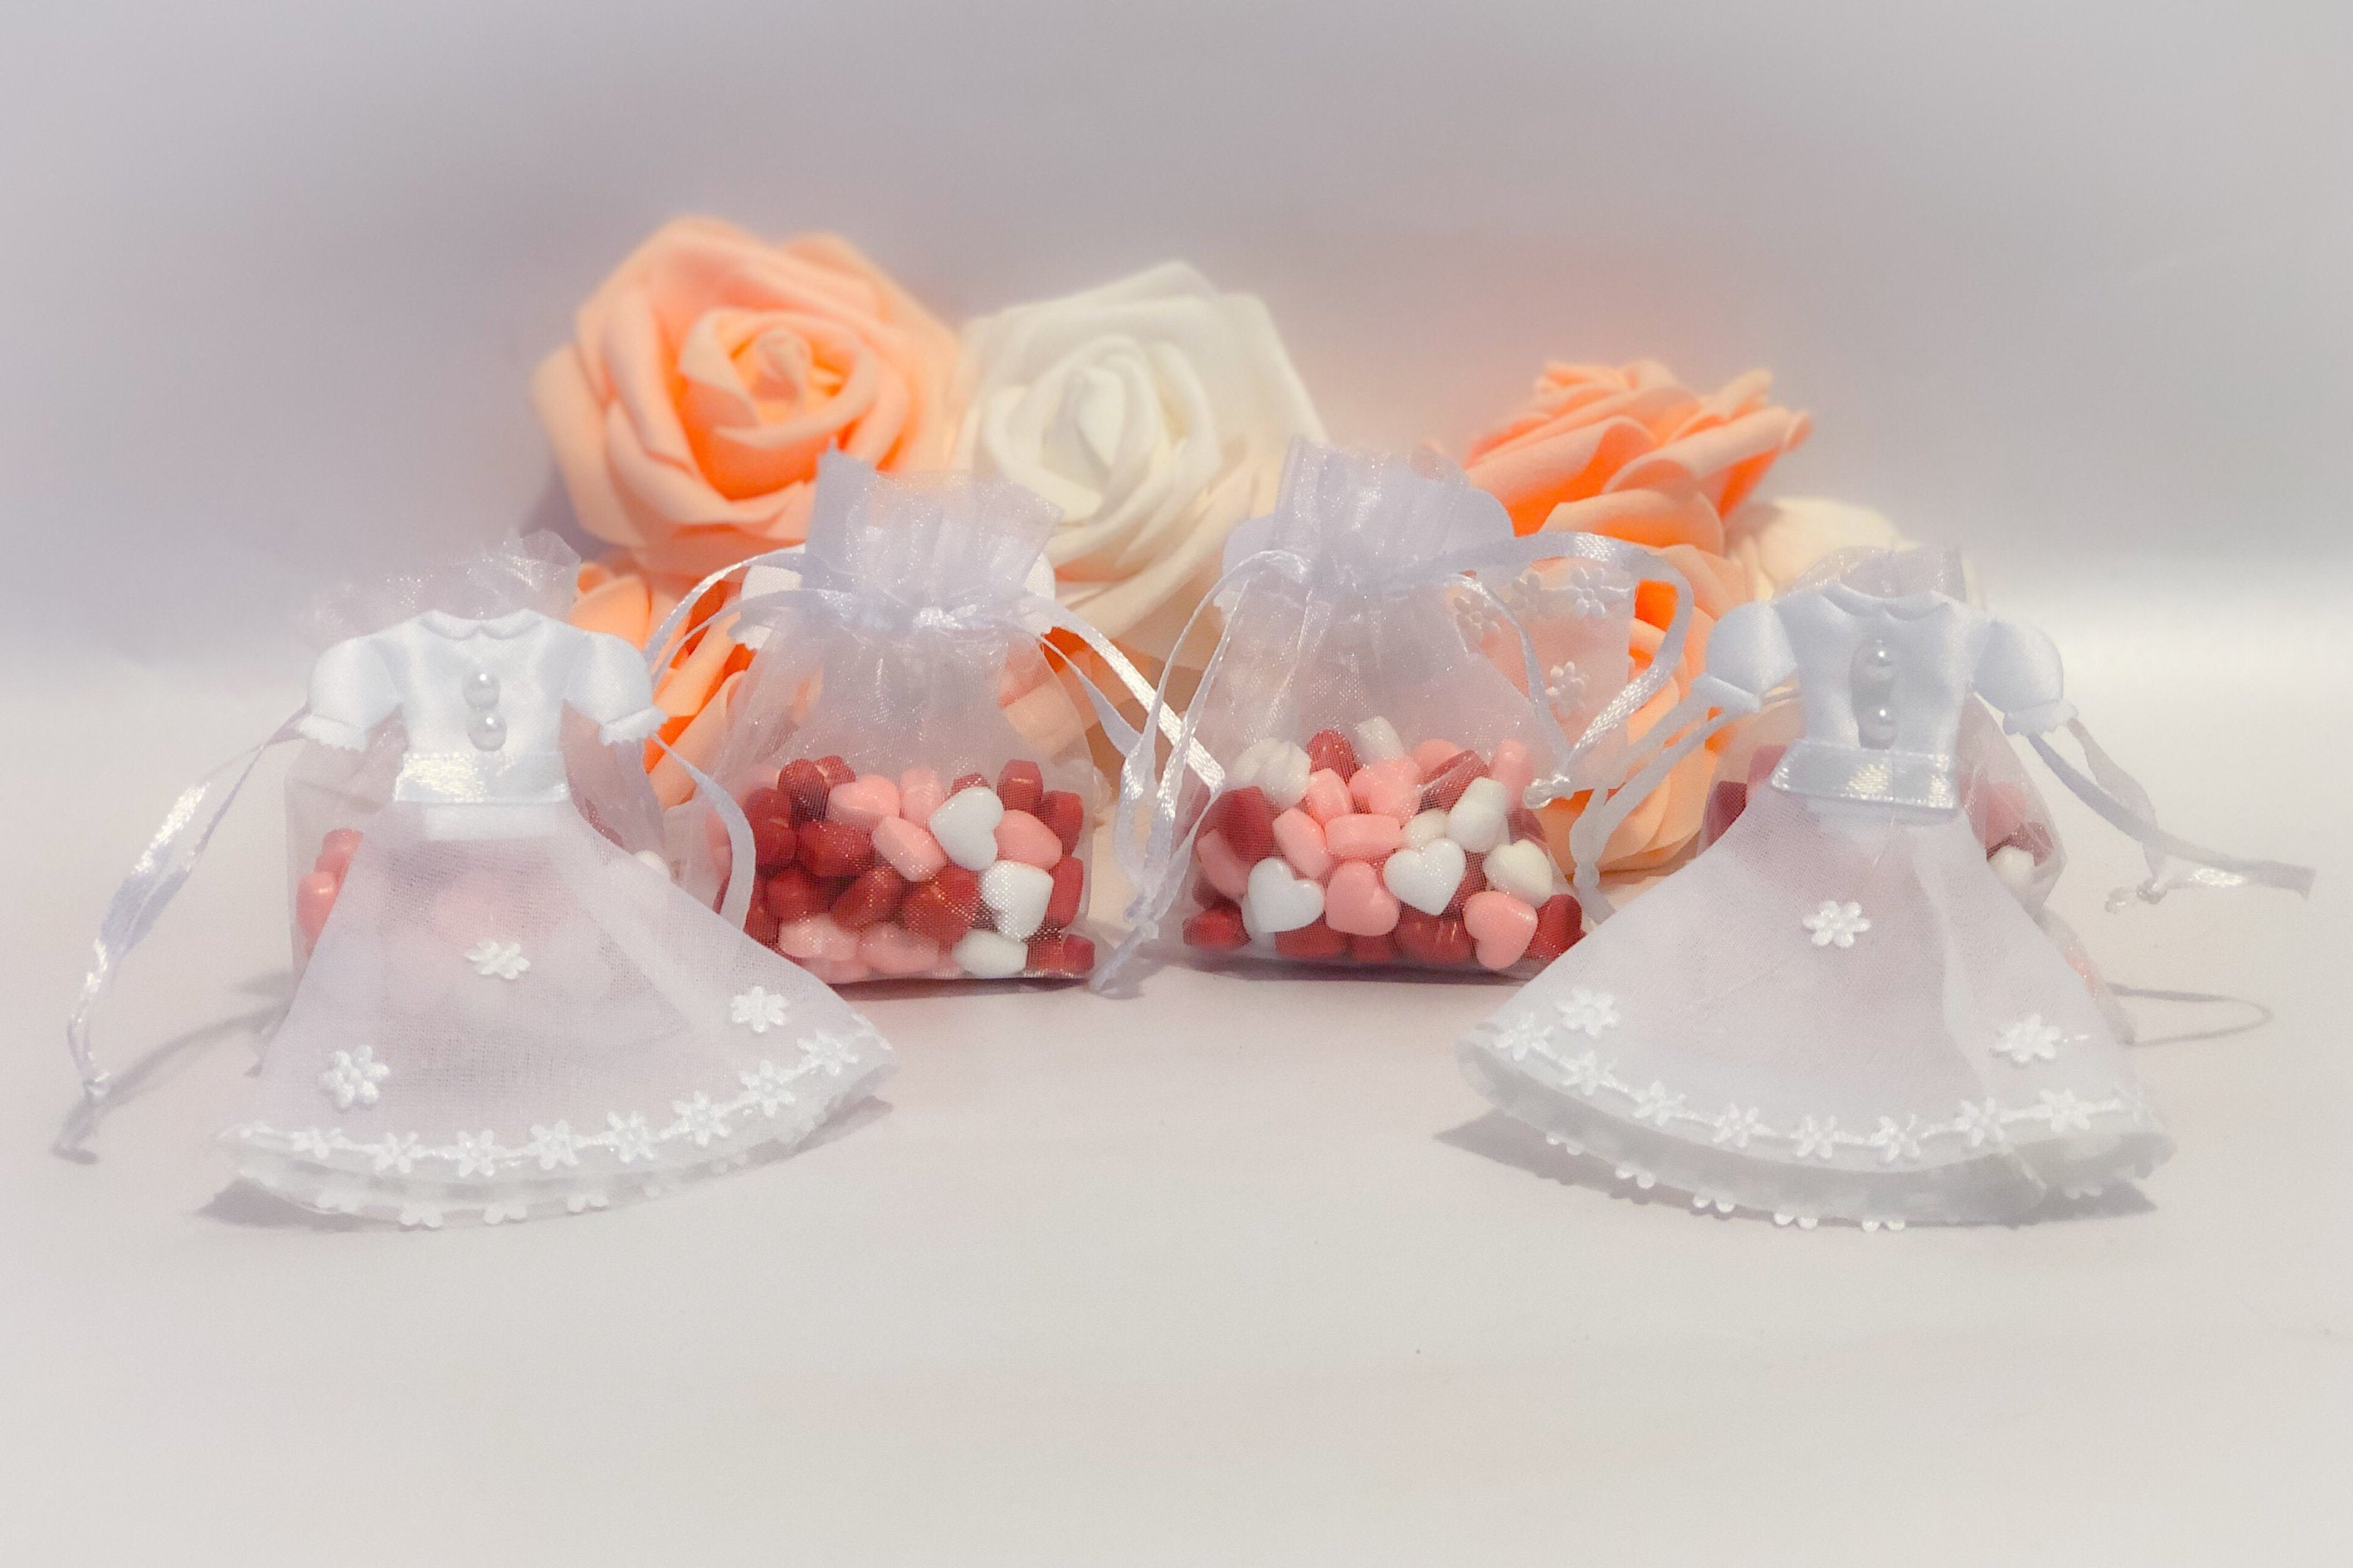 Small Bride and Groom White Organza Bags, Wedding Favors